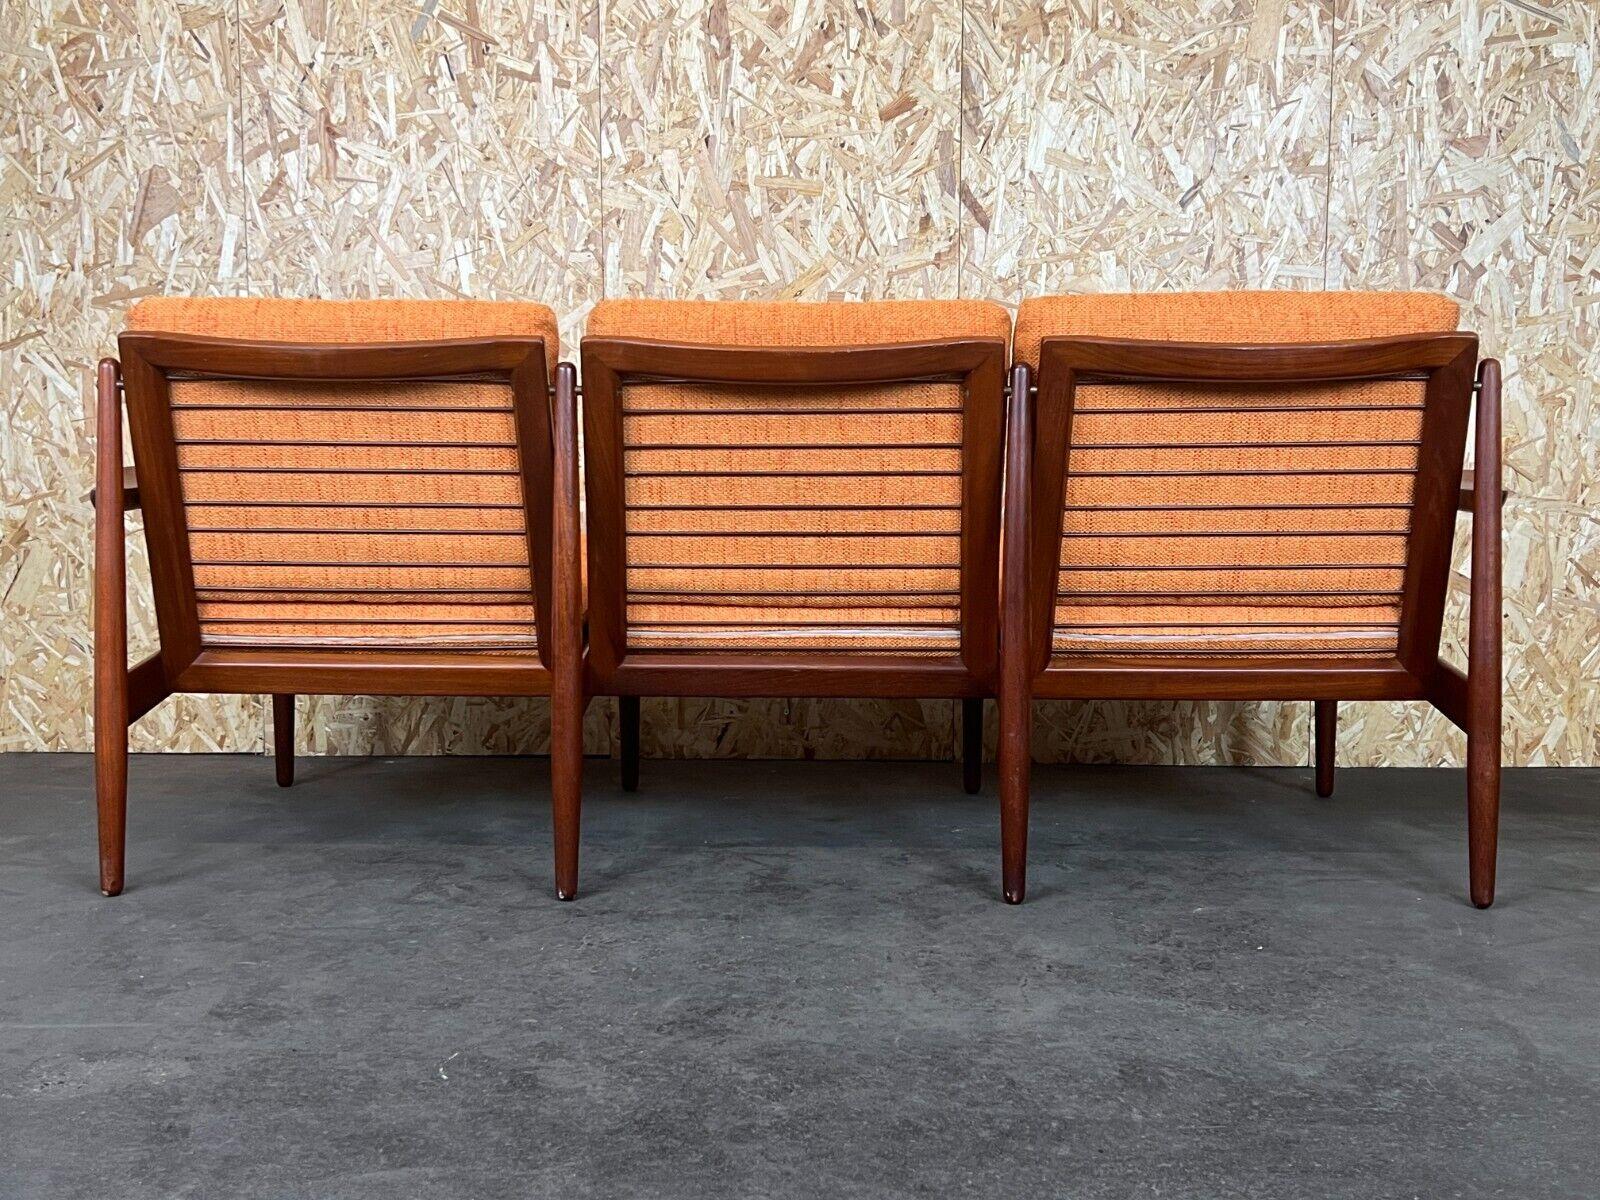 60s 70s teak sofa couch 3-seater Svend Aage Eriksen for Glostrup Danish Design  For Sale 2